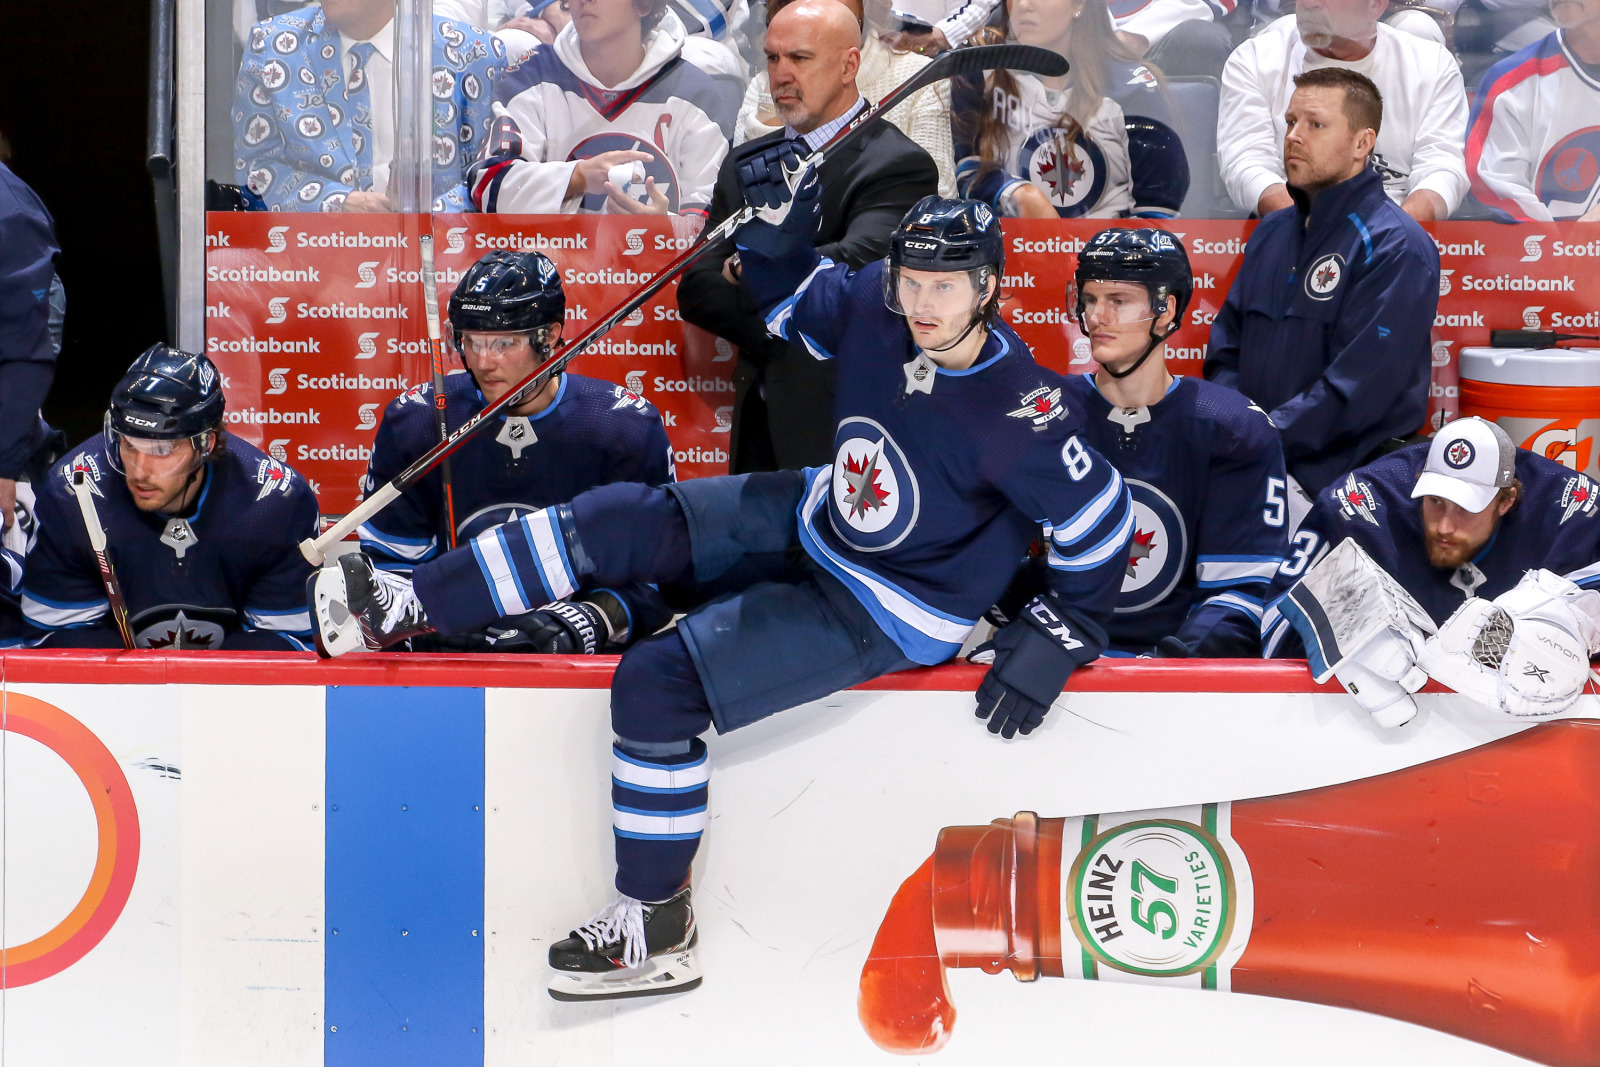 Did Trouba lie about wanting to stay with Jets? – Winnipeg Free Press